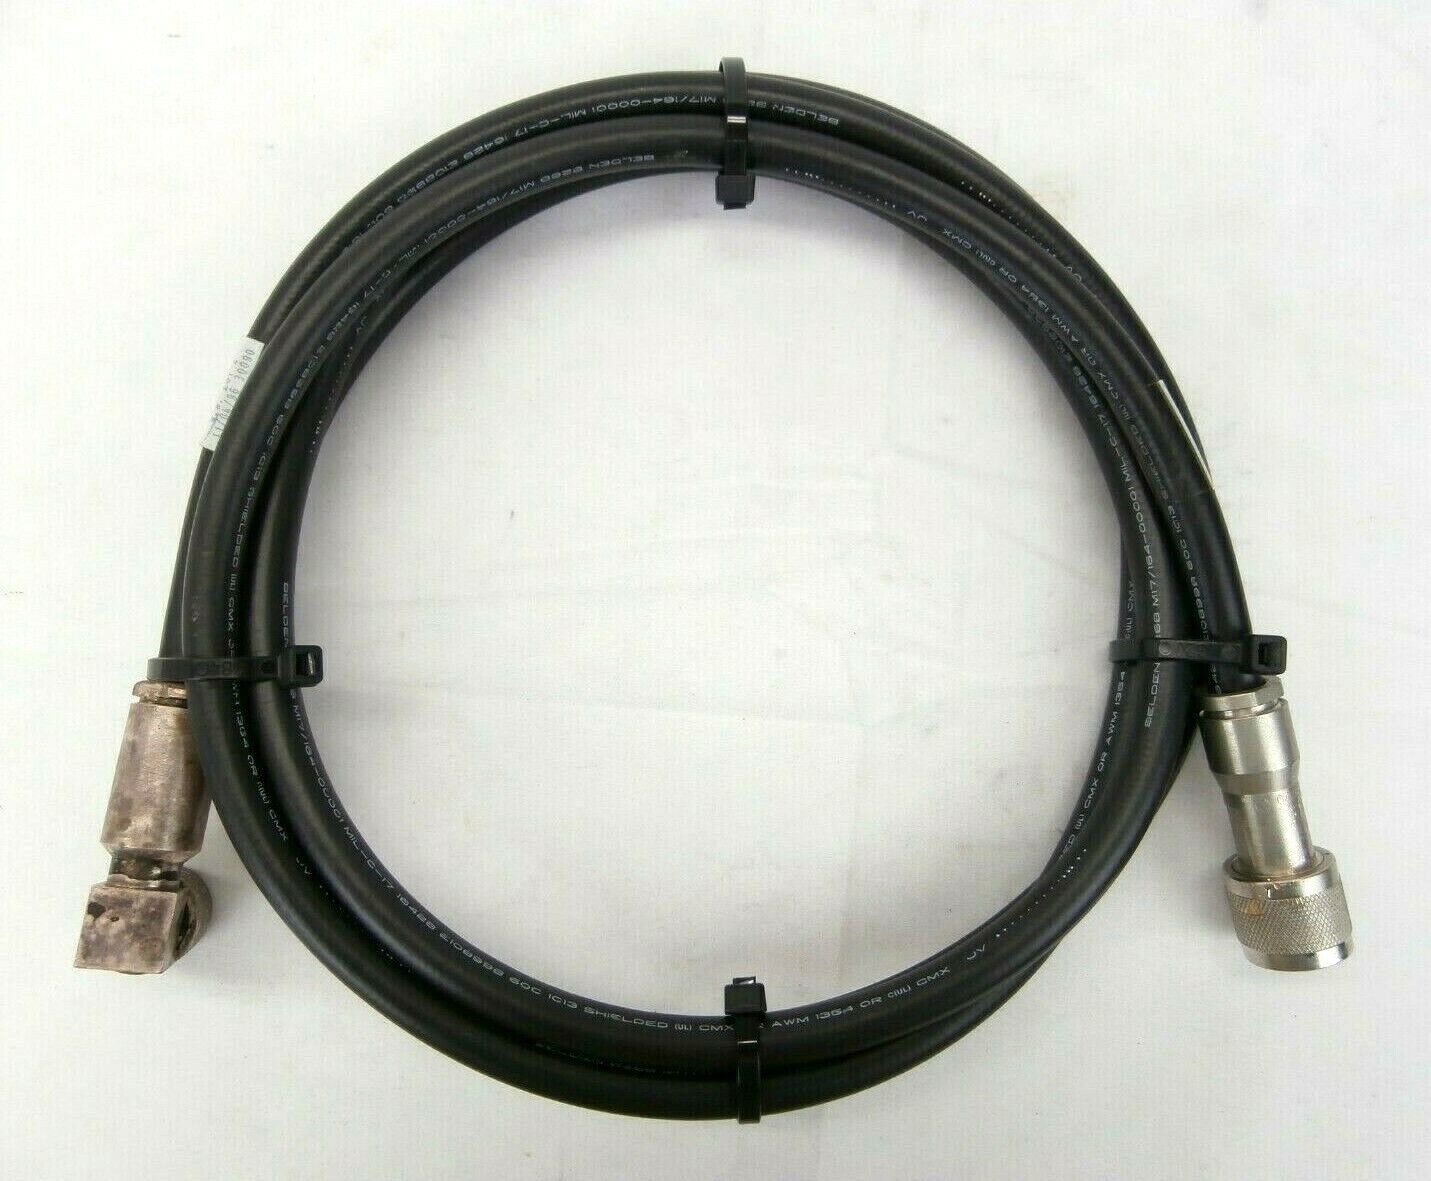 Lam Research 853-707092-002 RF Cable 7.5 Foot FPD Continuum Working Spare